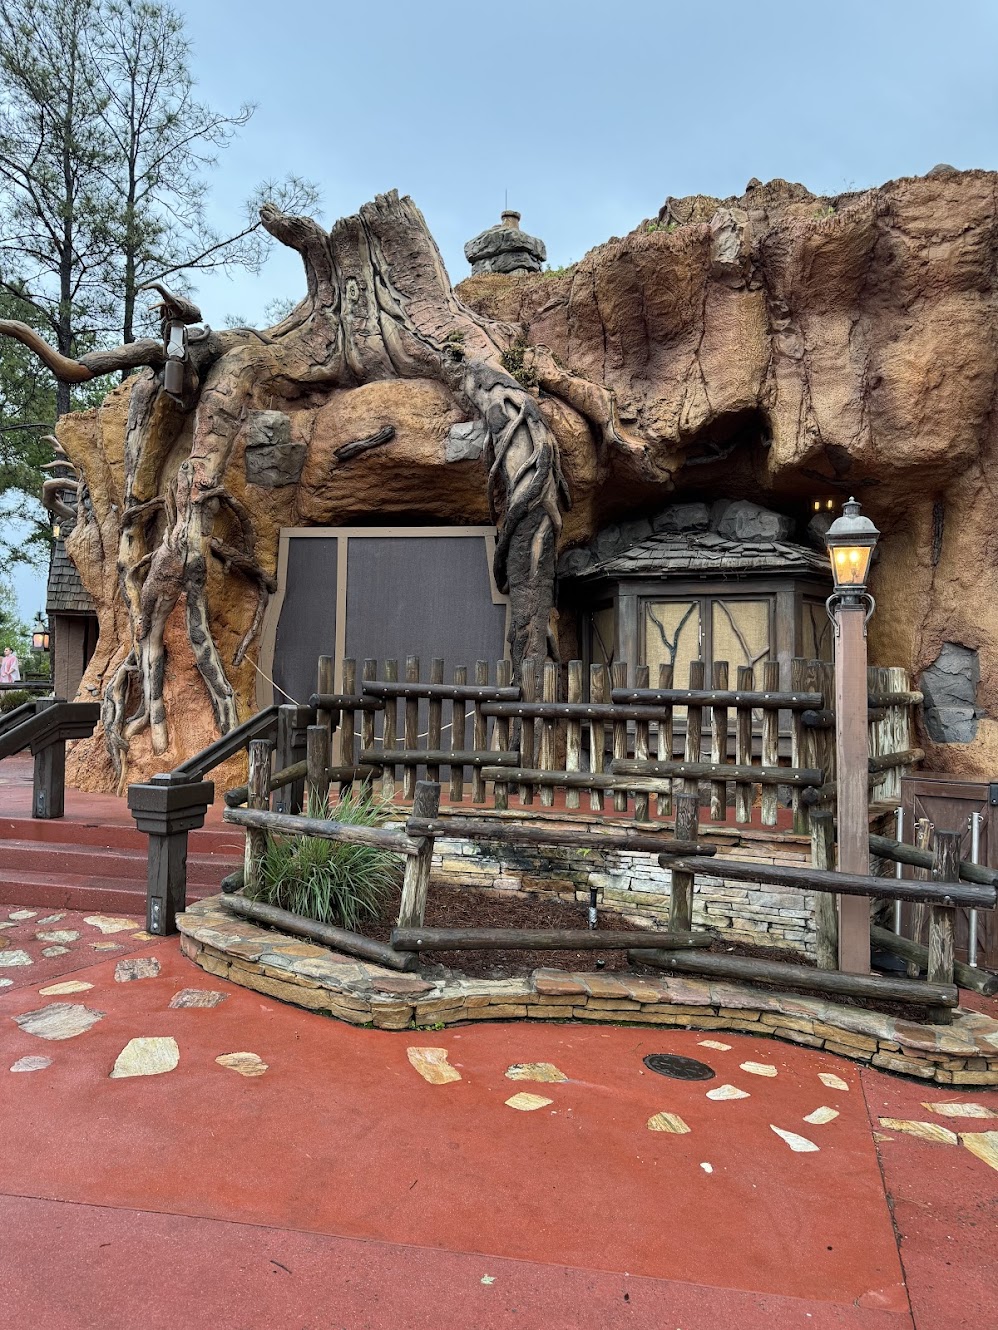 Briar Patch Remodel is Underway Outside Tiana’s Bayou Adventure